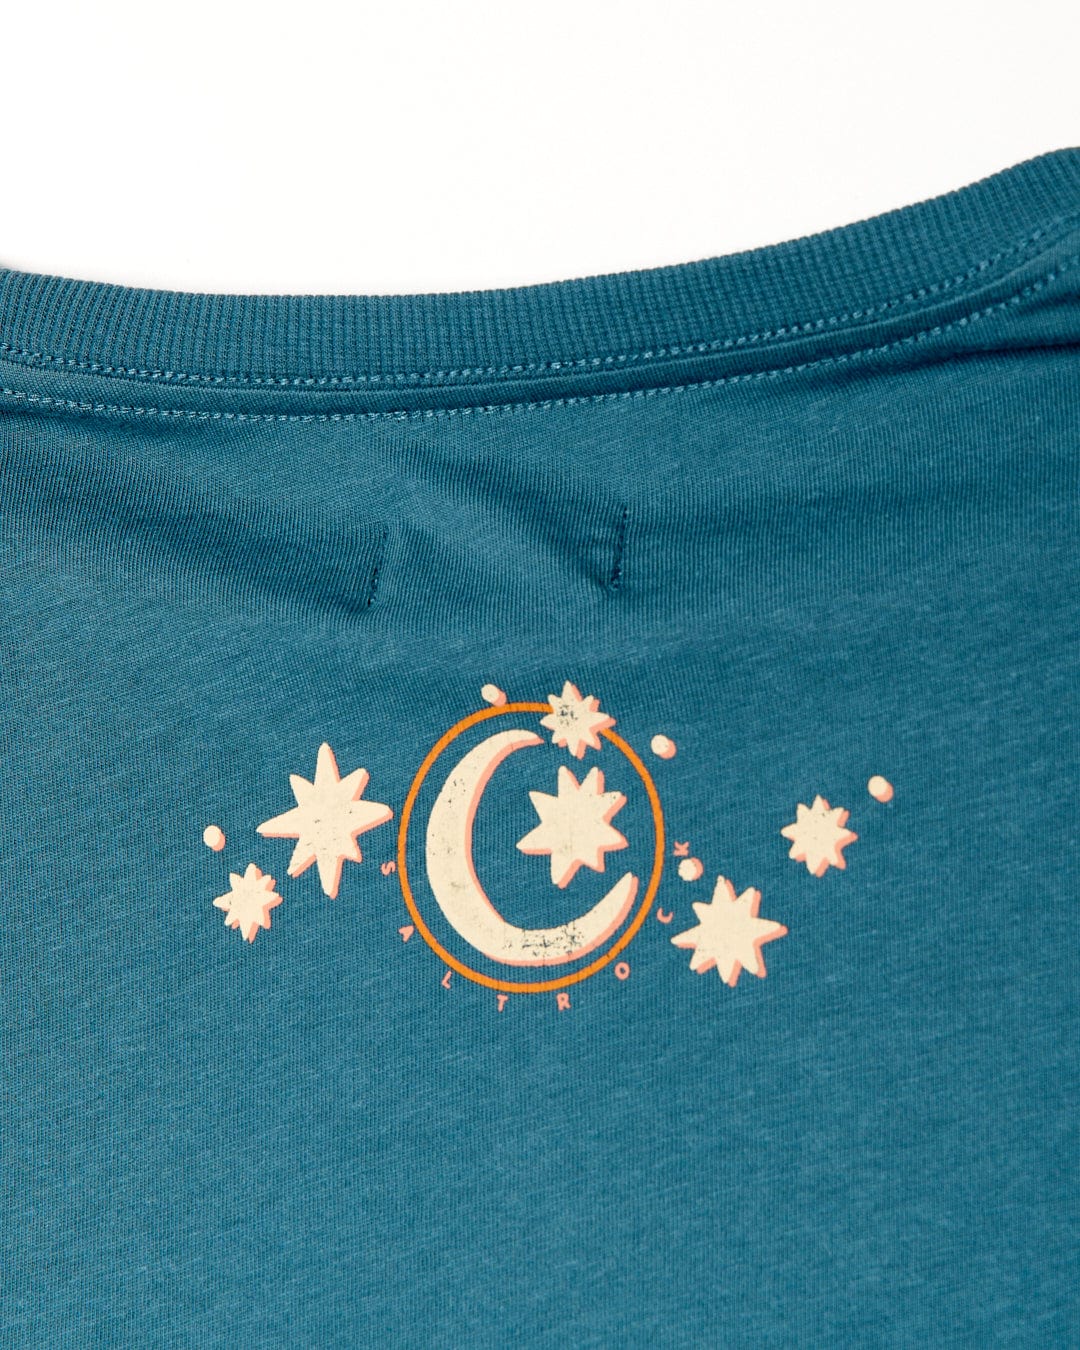 Close-up of a Saltrock Better Days - Recycled Womens Short Sleeve Relaxed T-Shirt in Teal with a white luna crescent moon and stars design printed near the collar.